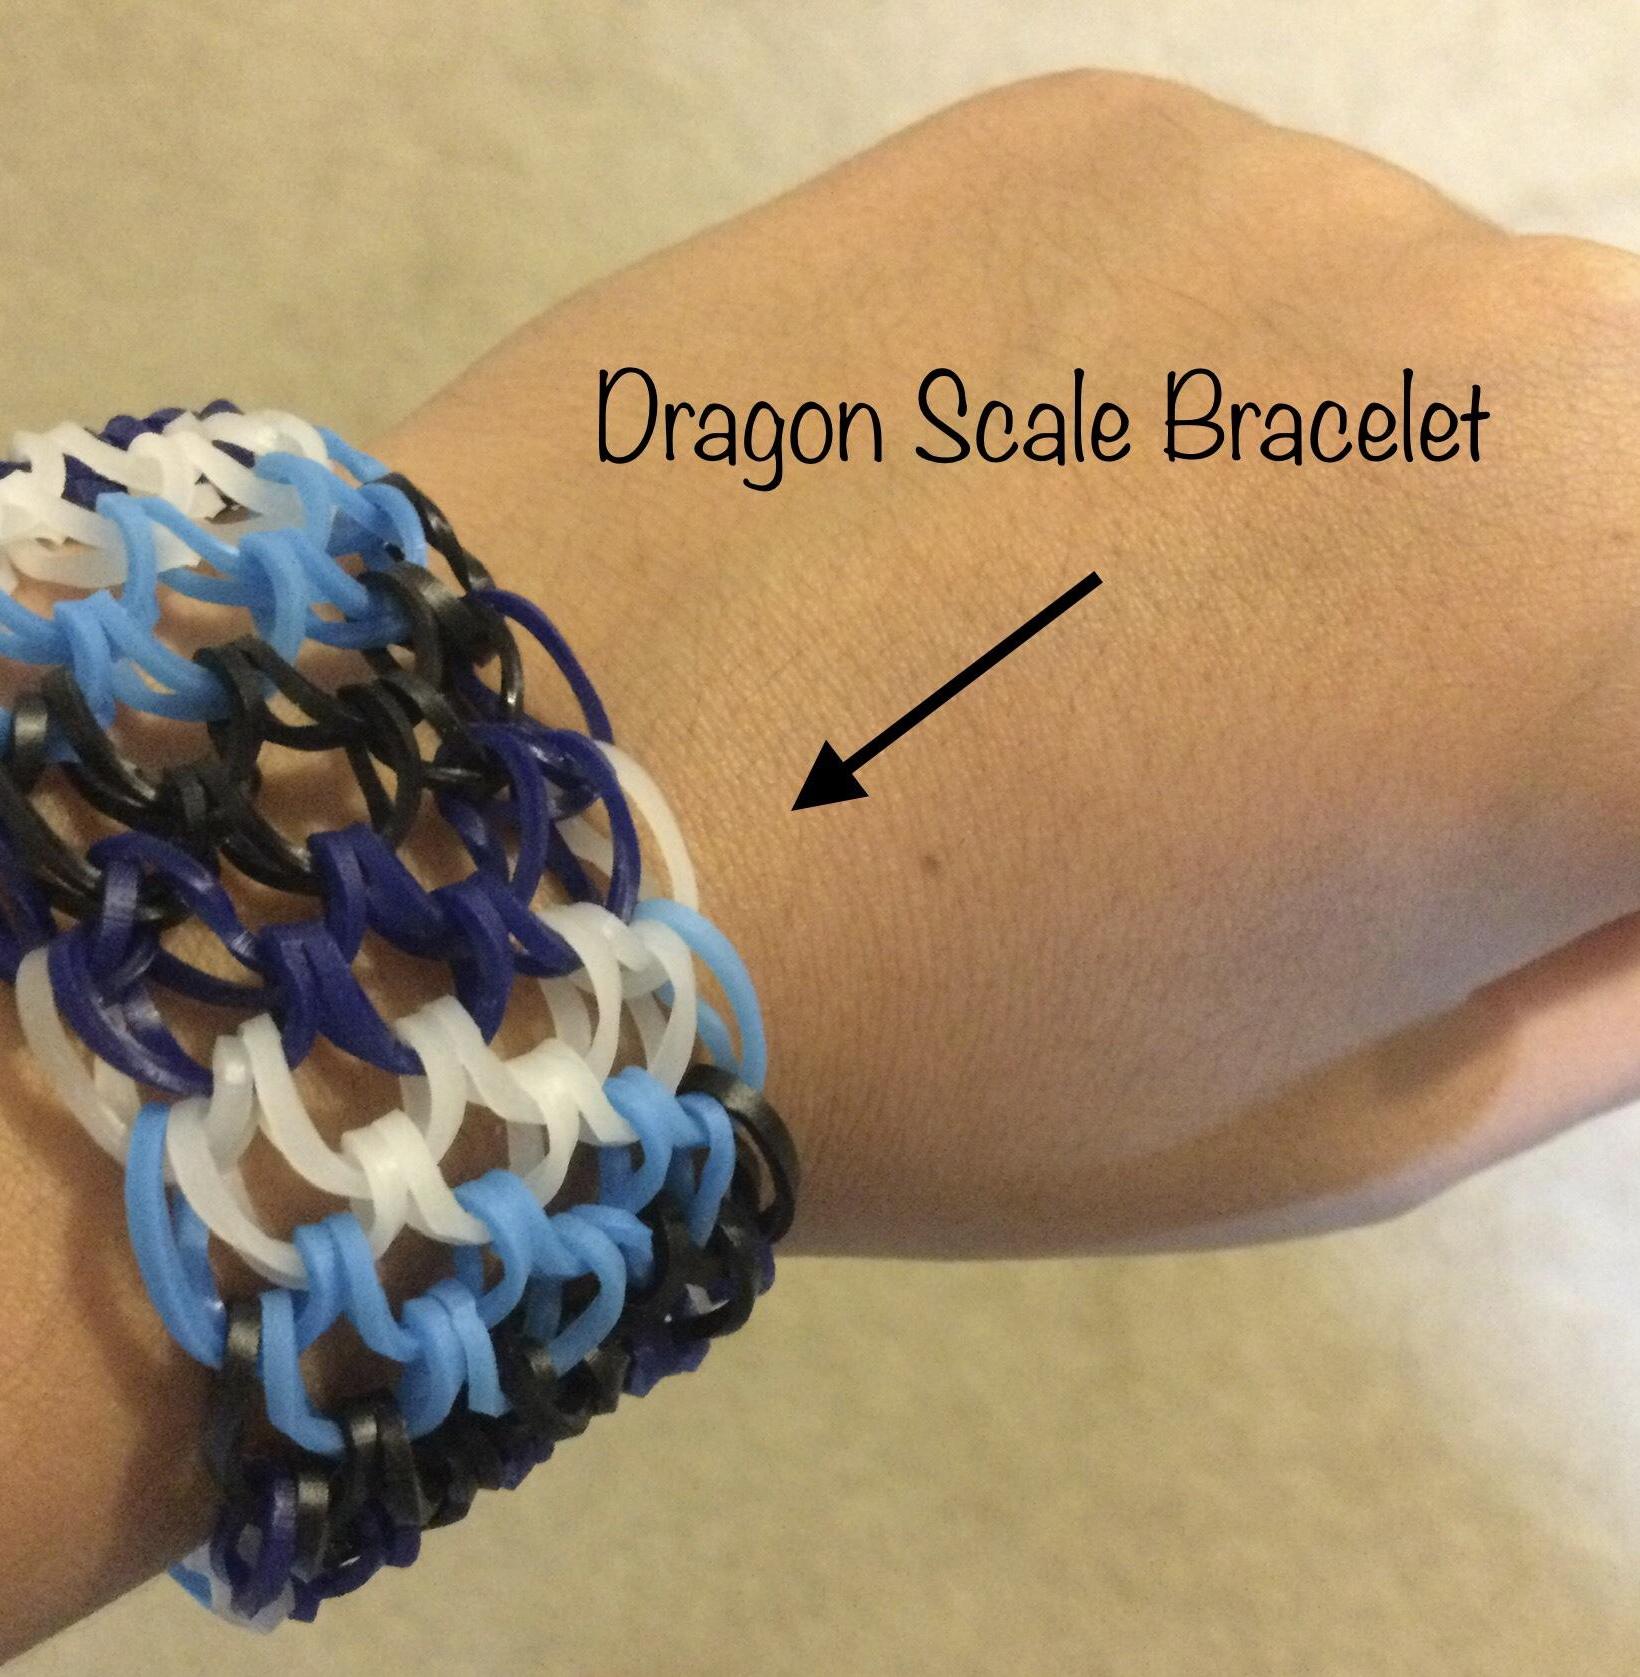 Creating the Dragon Scale Bracelet